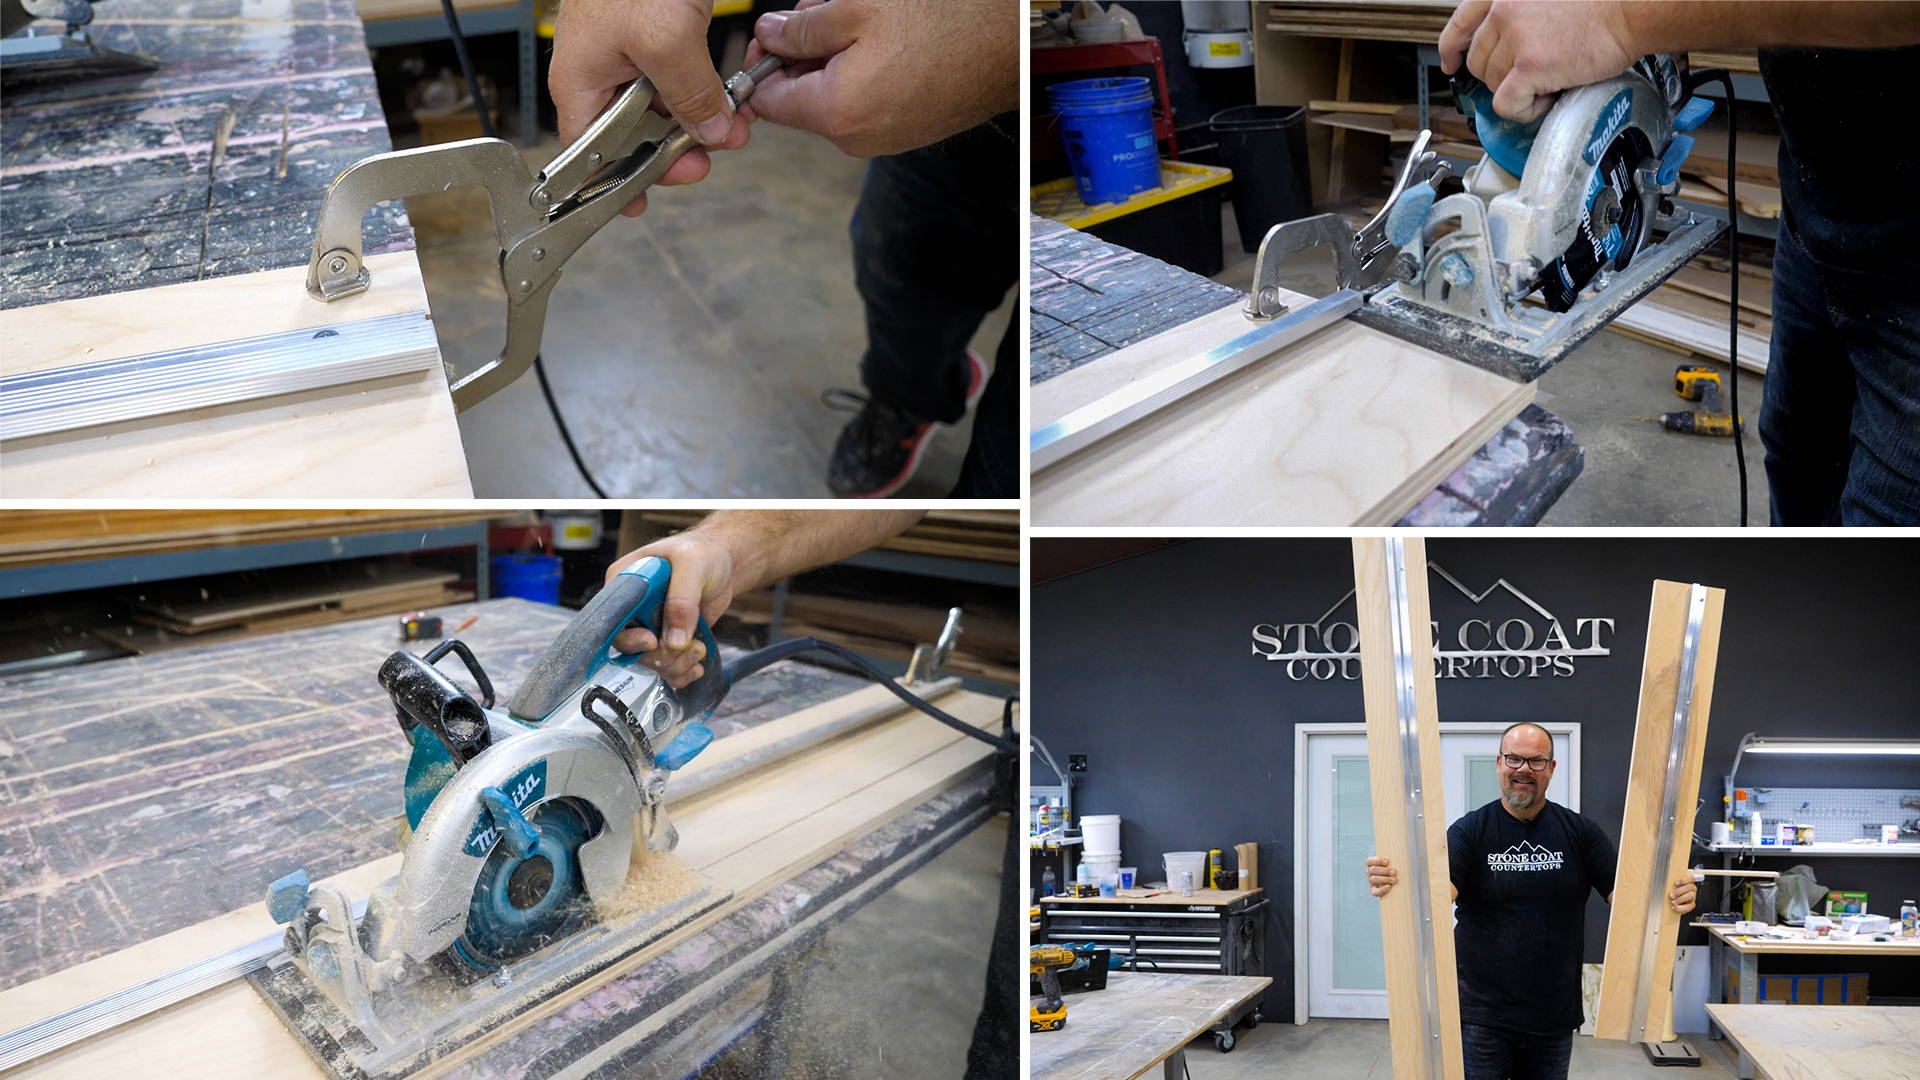 Step #5: Make your first cut! Secure saw guide to a table, slide circular saw into the guide, and make your initial cut. 